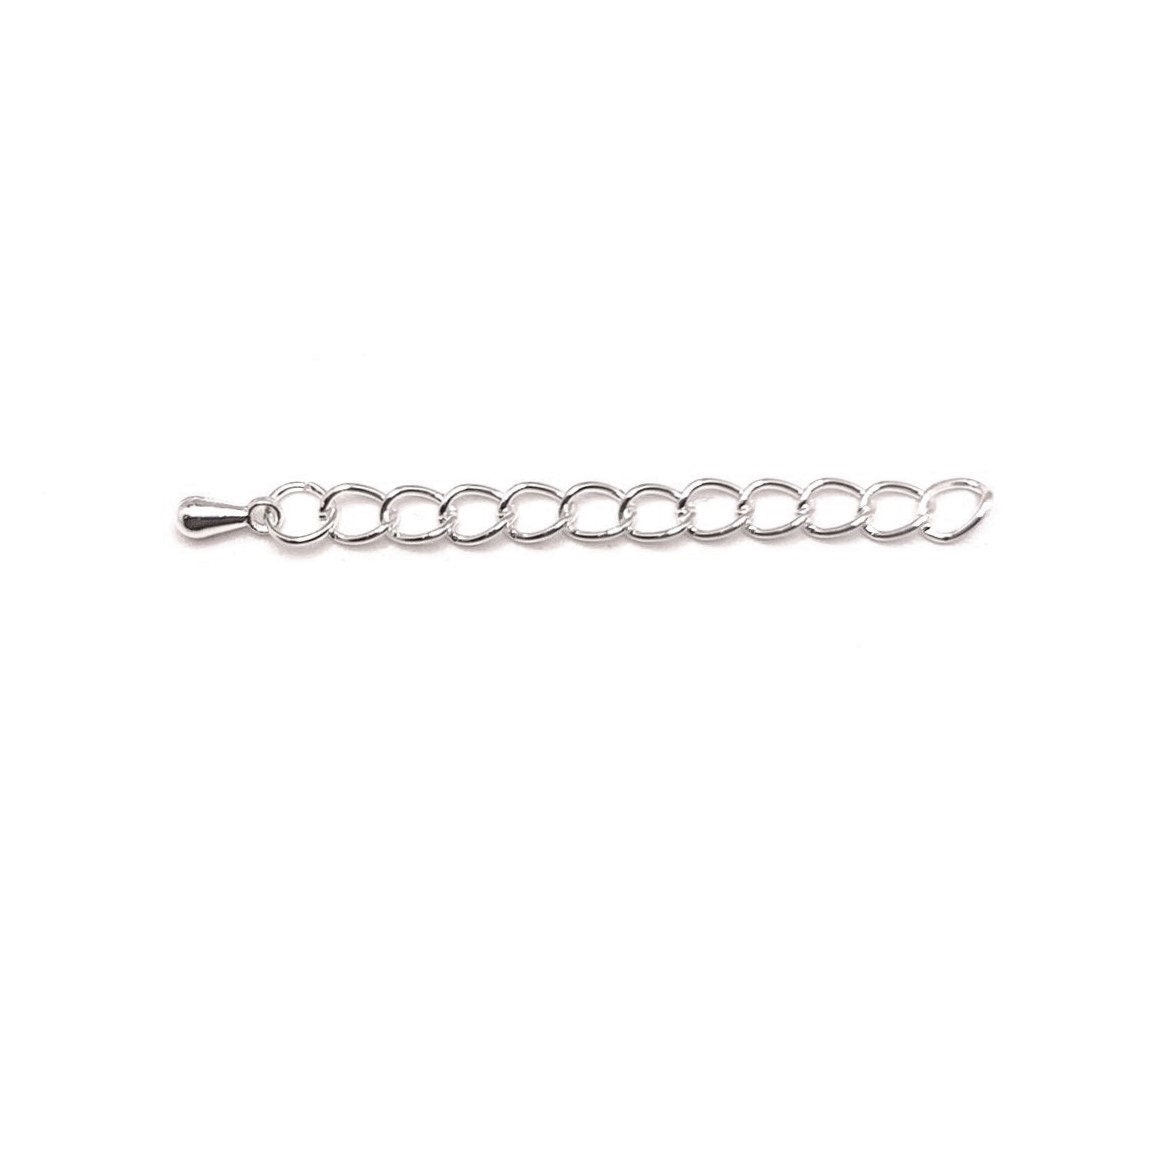 Necklace Extender Silver, 10 Pack Chain Extension Bulk for